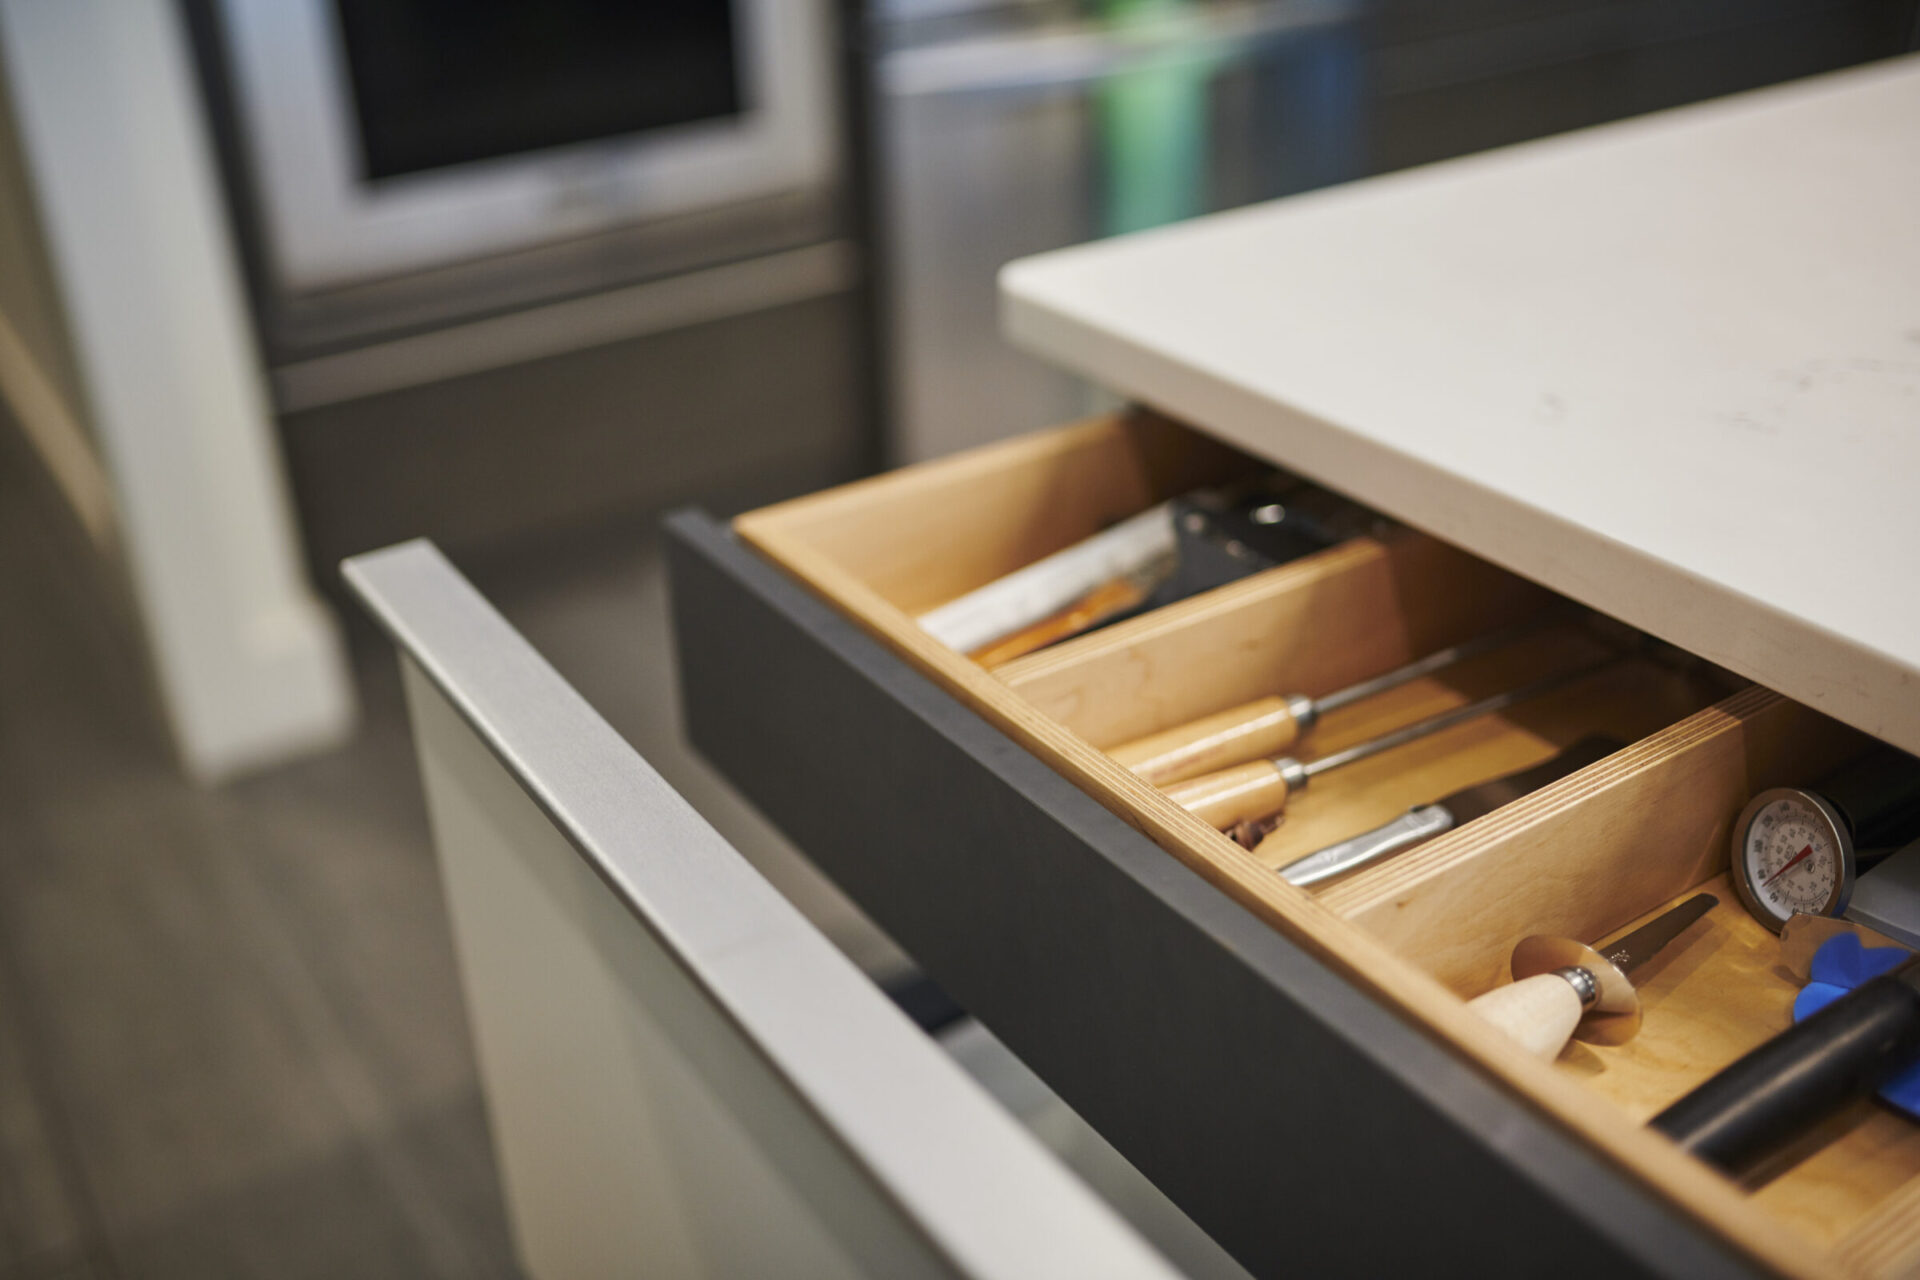 A modern kitchen drawer is partially open, revealing neatly arranged cooking utensils like knives, a timer, and other kitchen tools in an organizer.